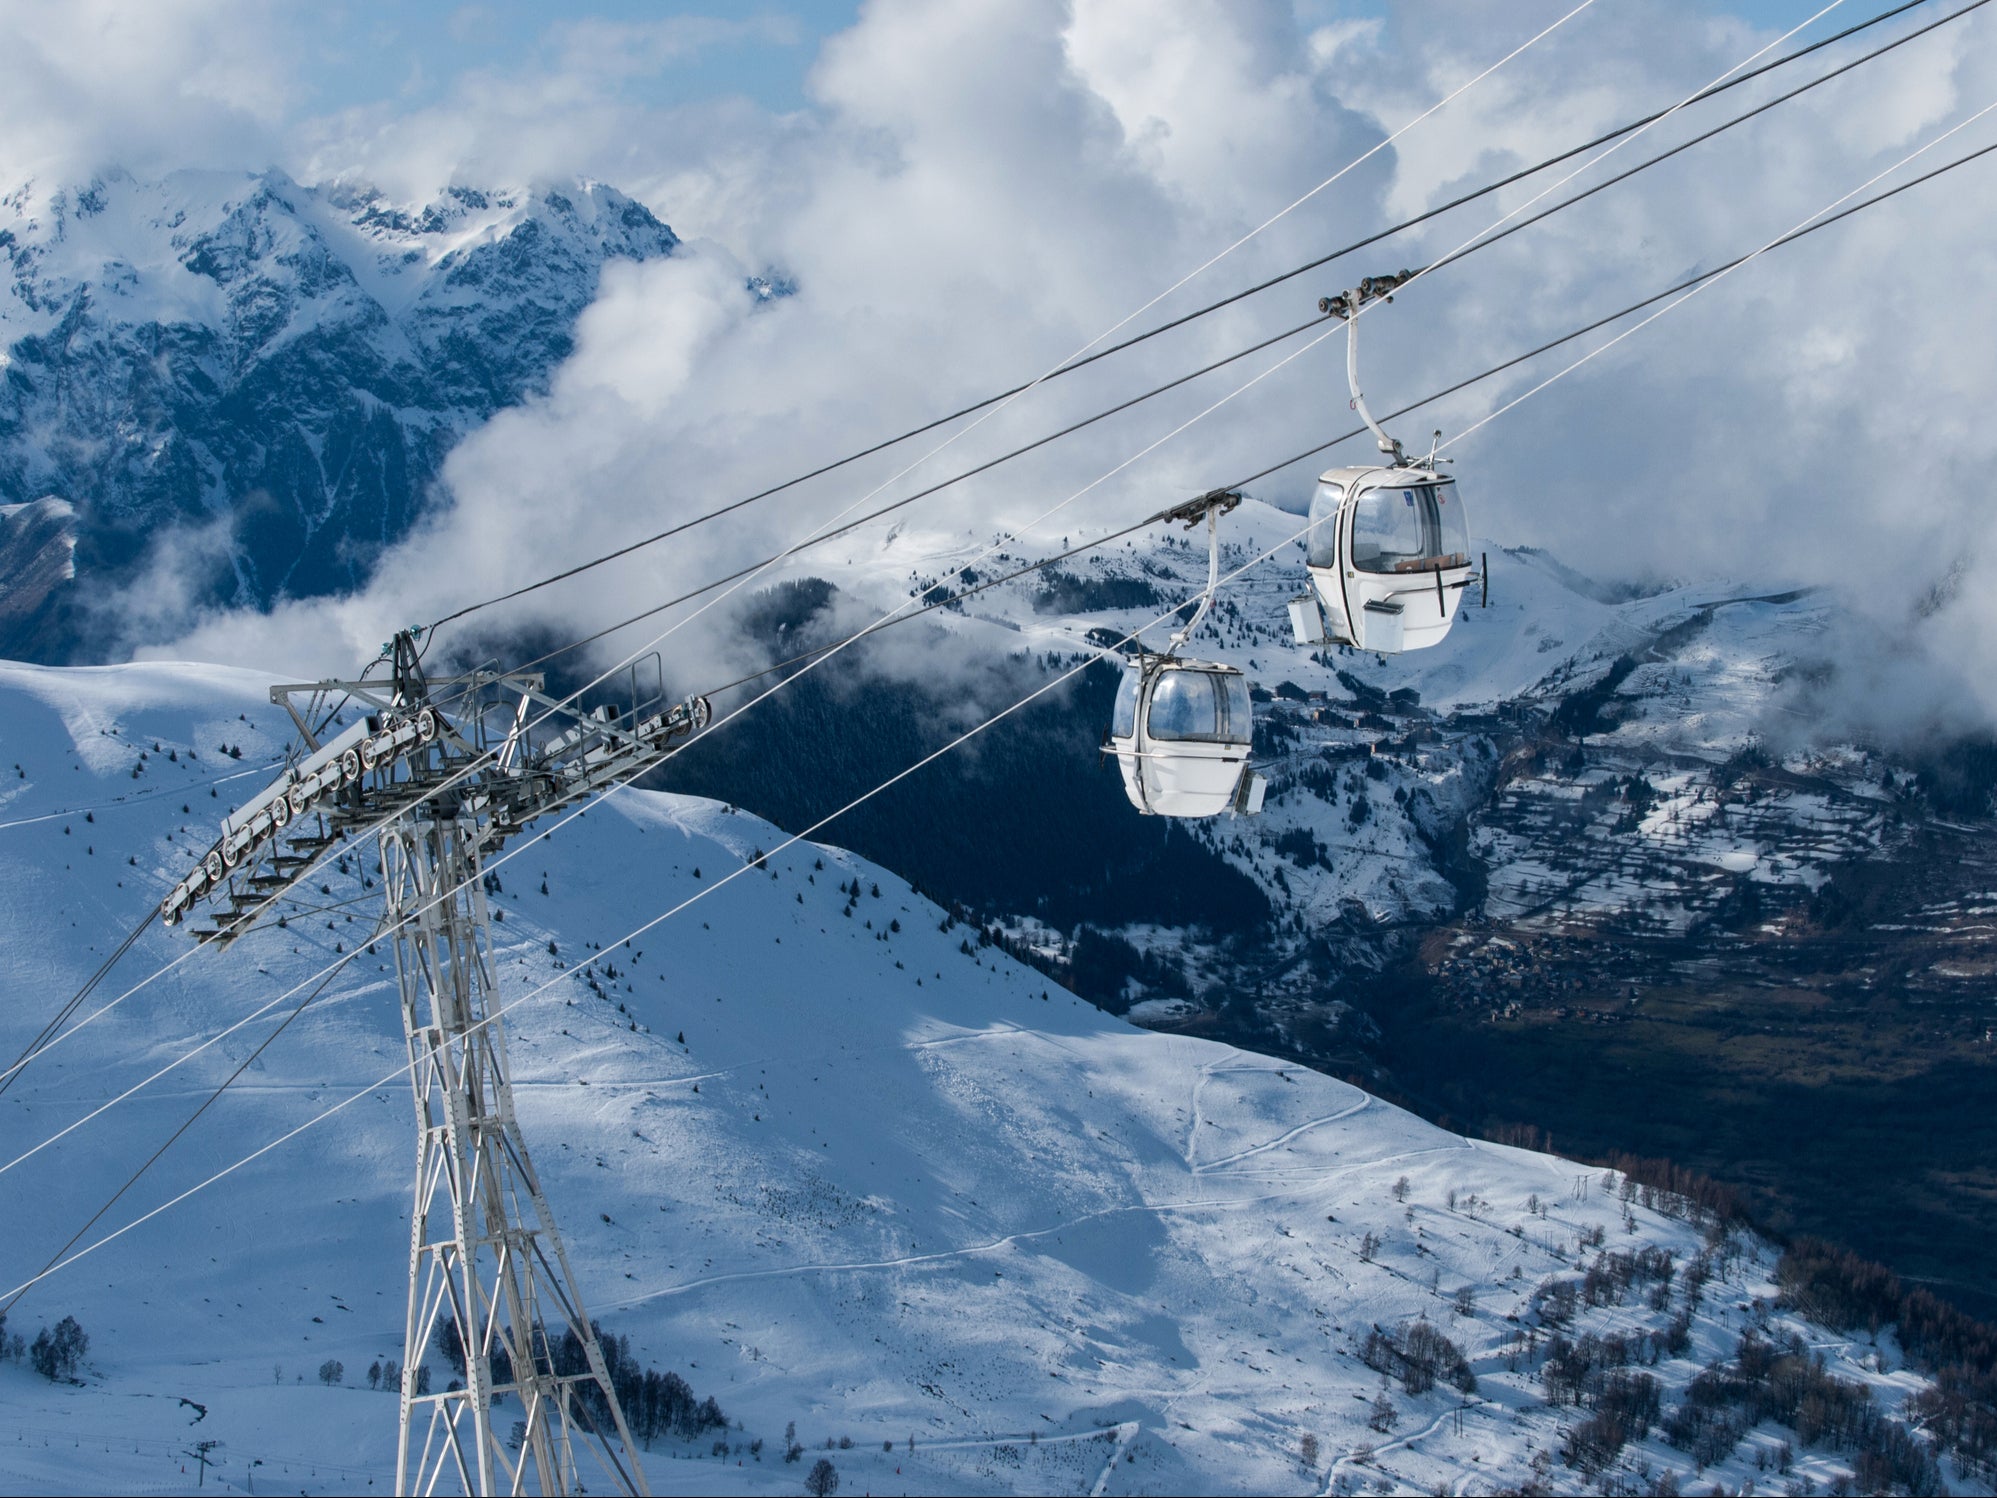 The man fell from a gondola in the Deux Alpes resort on Saturday at around 5pm